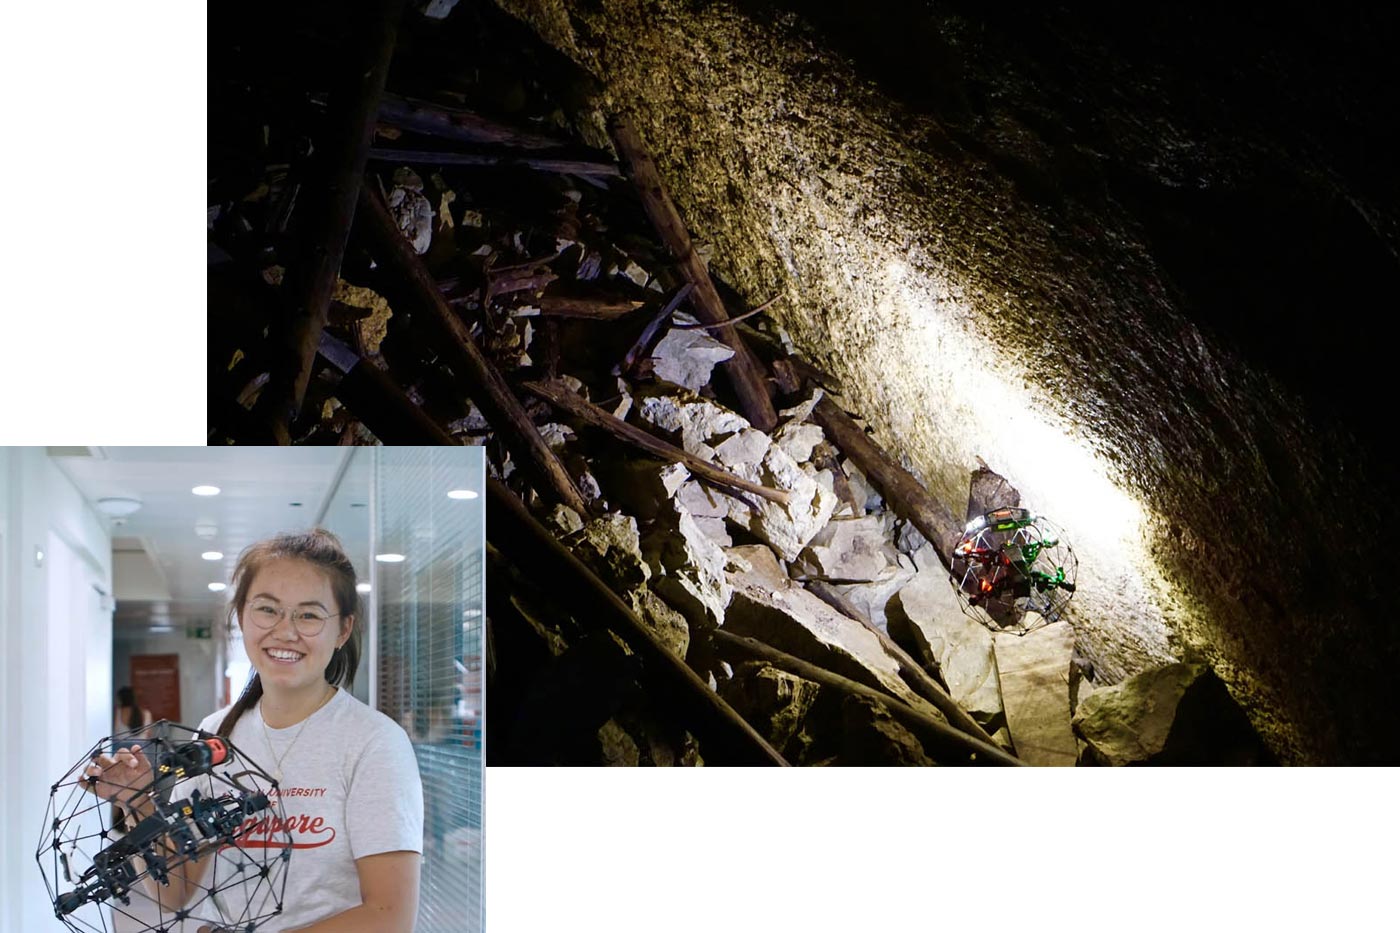 photo of student smiling and holding device and photo of debris